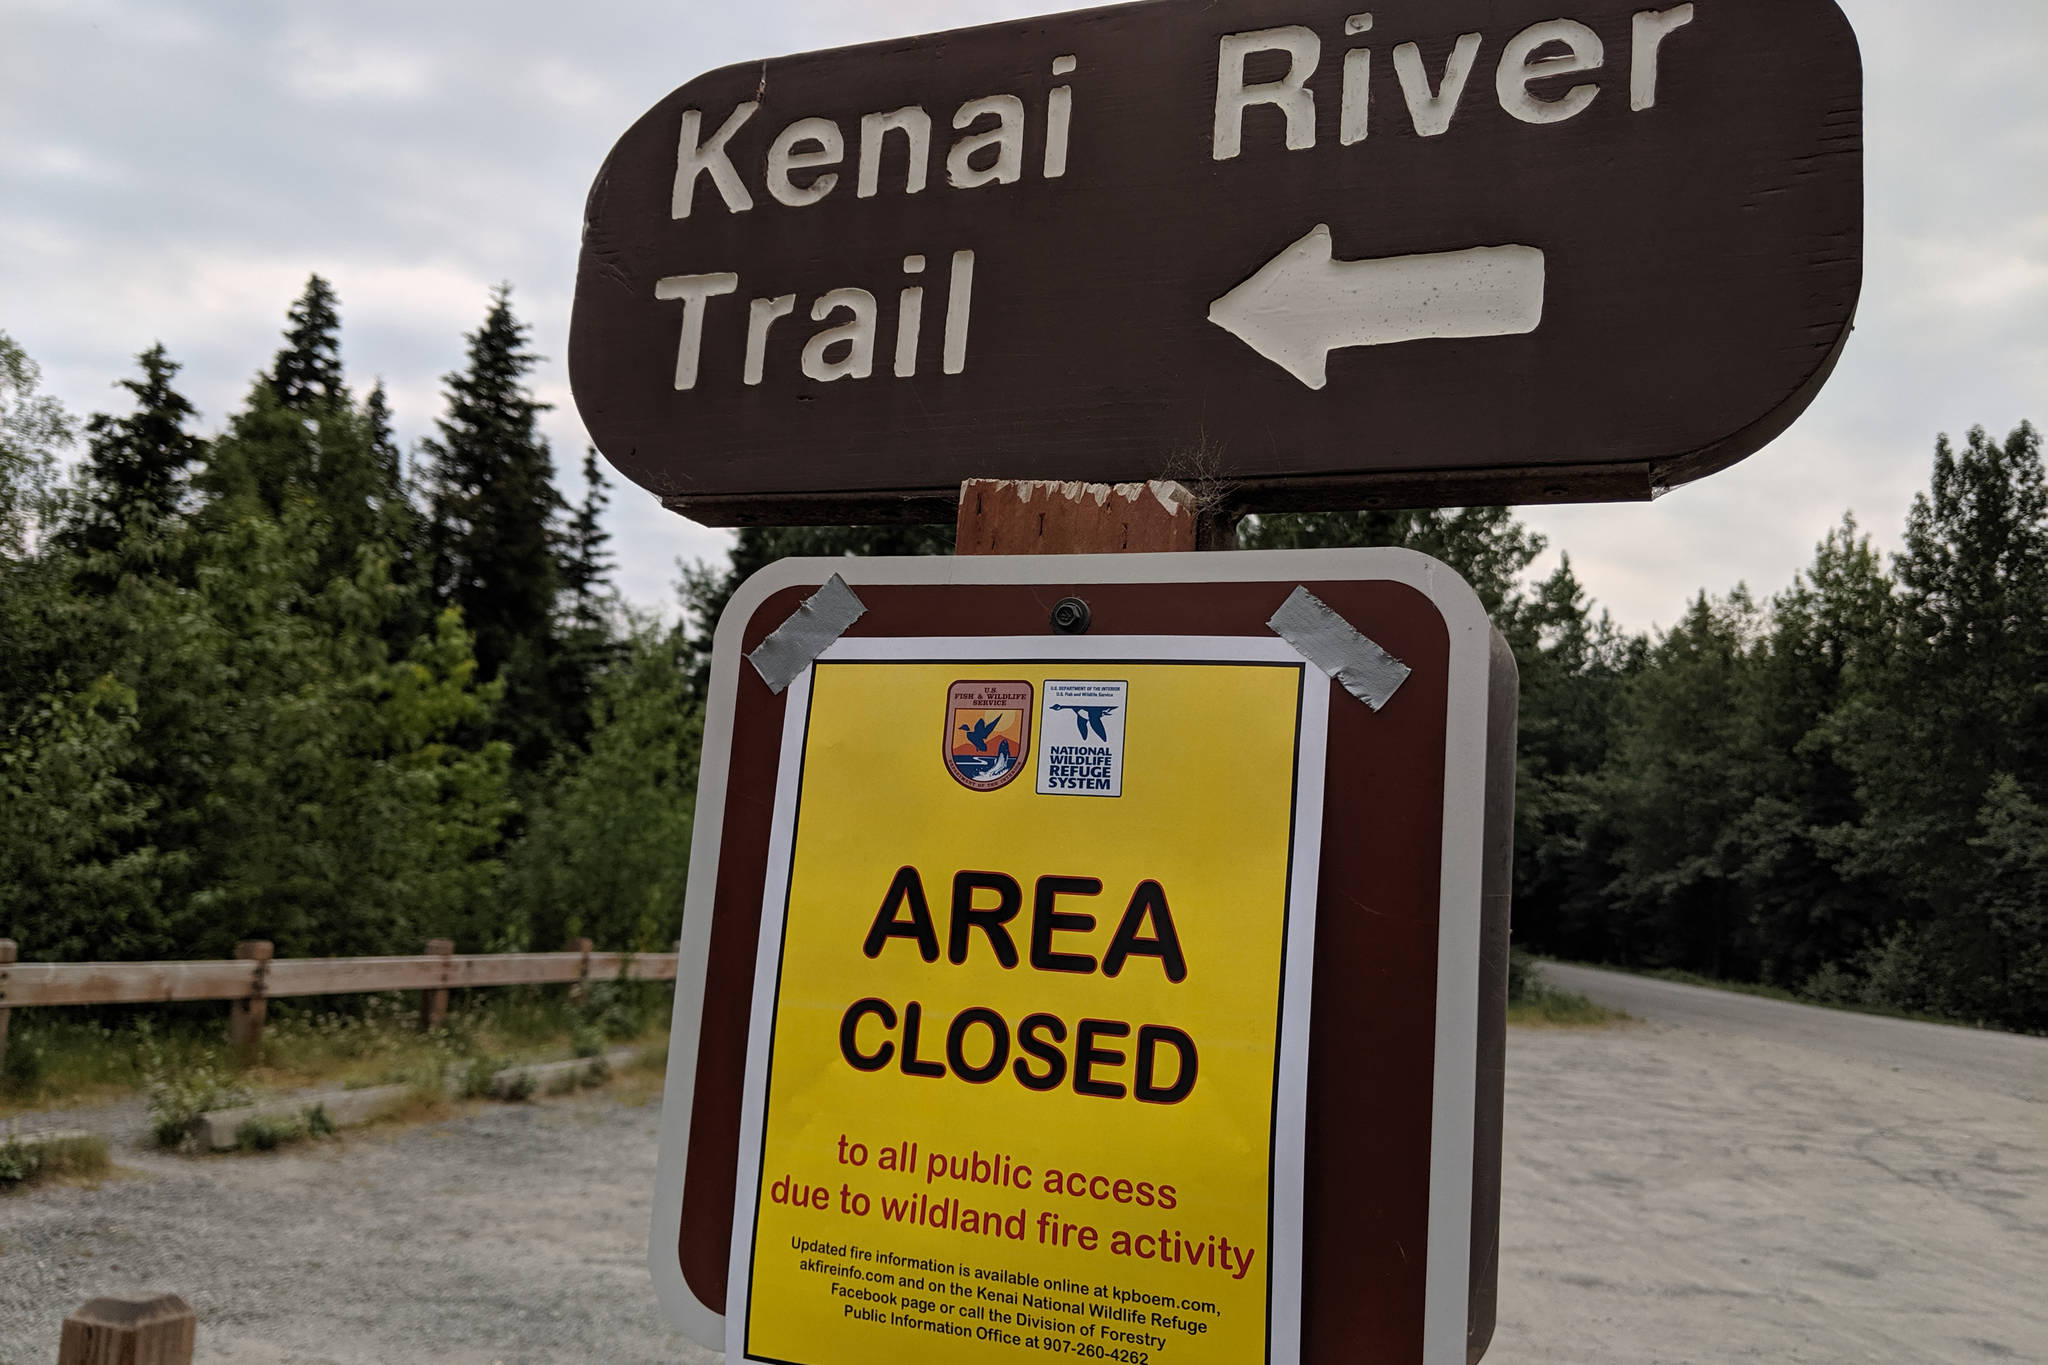 A sign for trail closures can be seen on Skilak Lake Road on Sunday, June 23, 2019. The Kenai Wildlife Refuge closed recreation areas, including Bottenintnin Lake, Watson Lake Campground, Egumen Lake Trail, Petersen Lake Campground, Kelly Campground, Seven Lakes Trail, Skyline Trail and Jean Lake Campground over the weekend. (Photo by Erin Thompson/Peninsula Clarion)